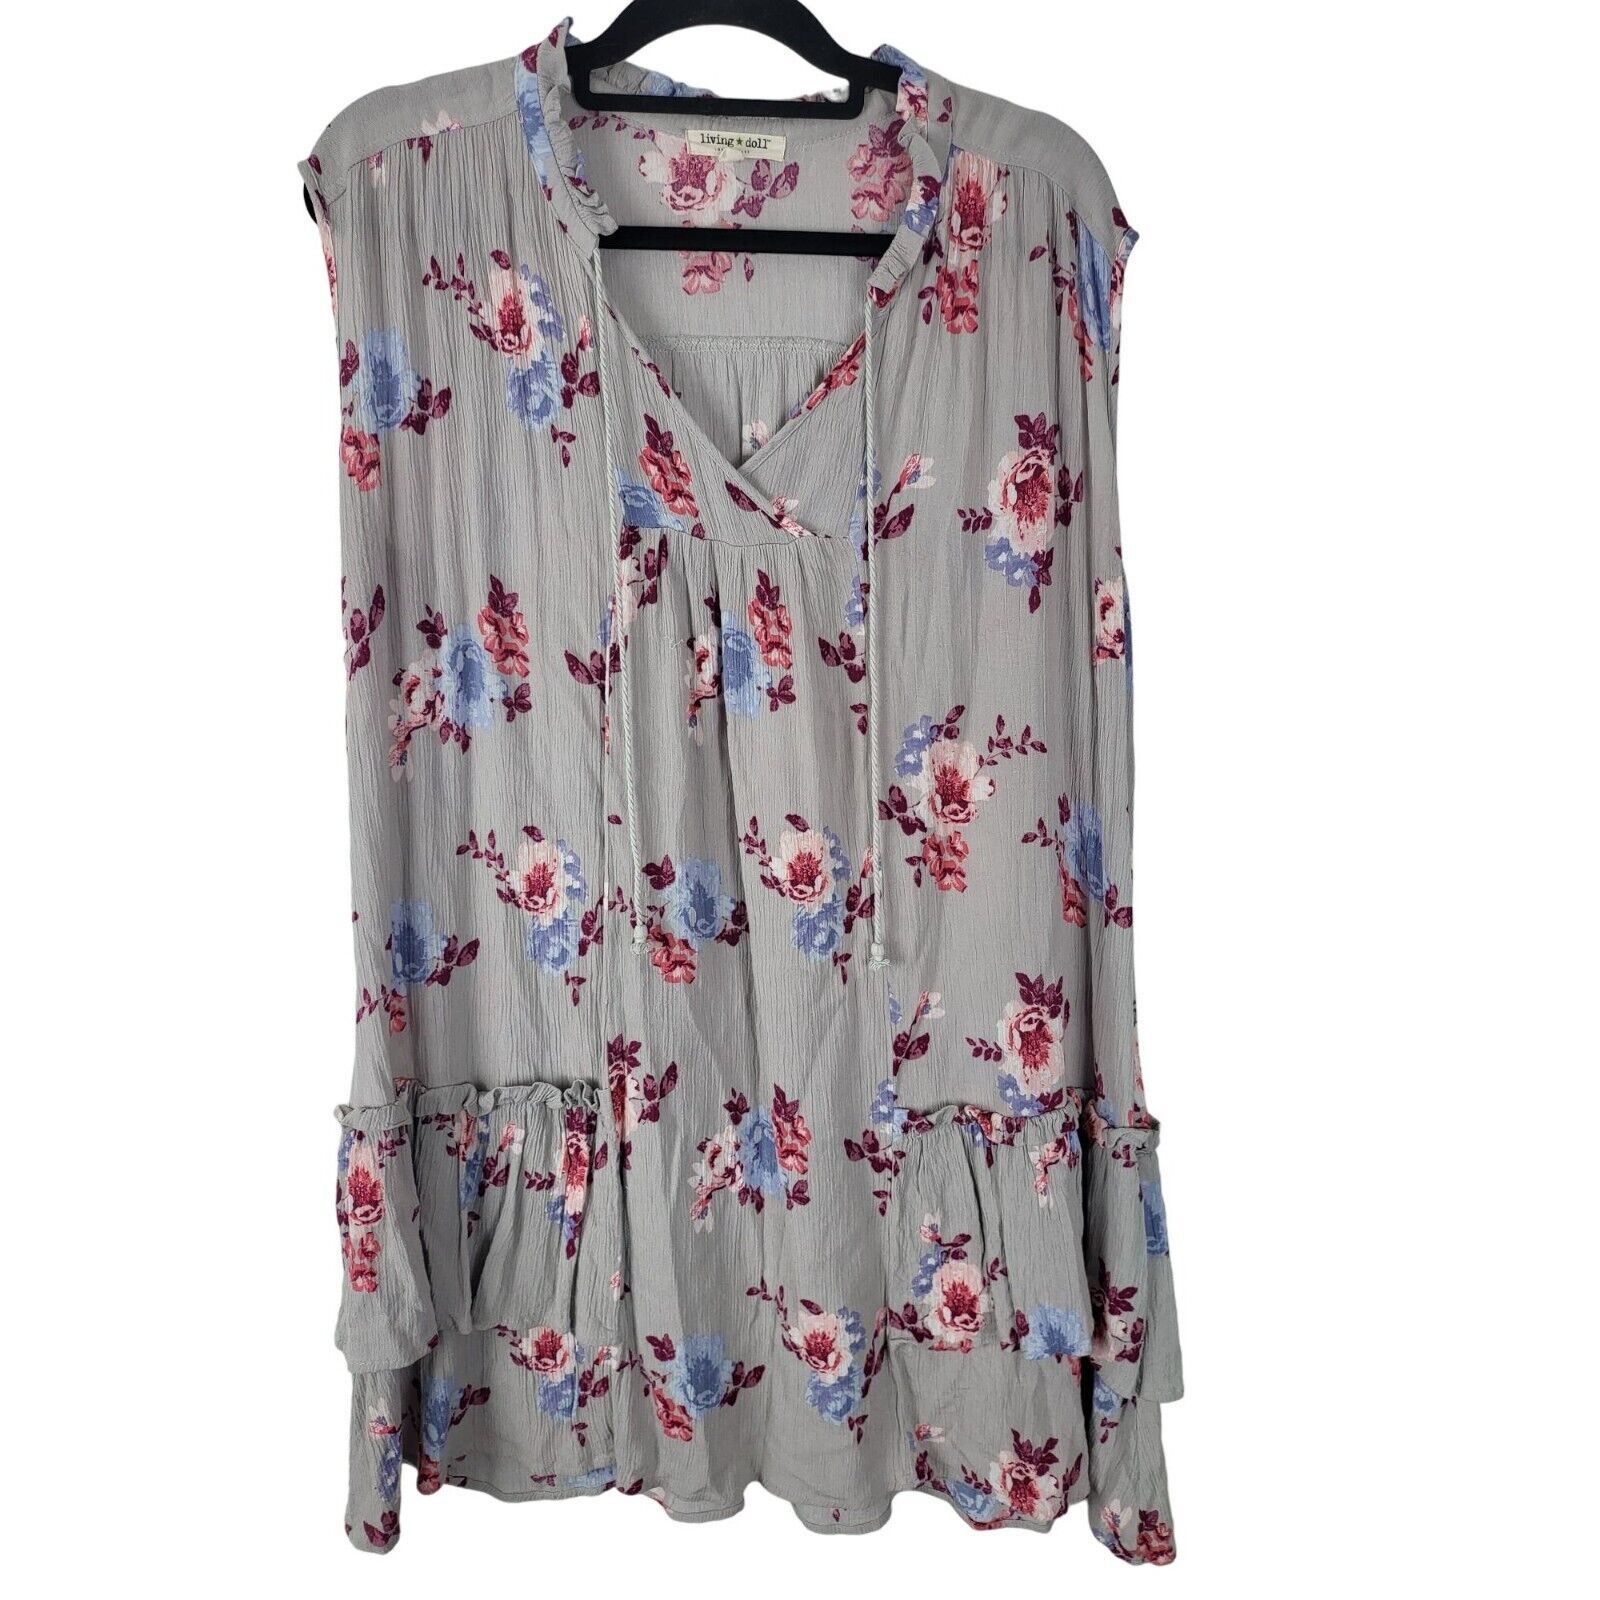 Primary image for Living Doll Tank Dress 1X Womens Plus Size Grey Floral VNeck Pullover Sleeveless